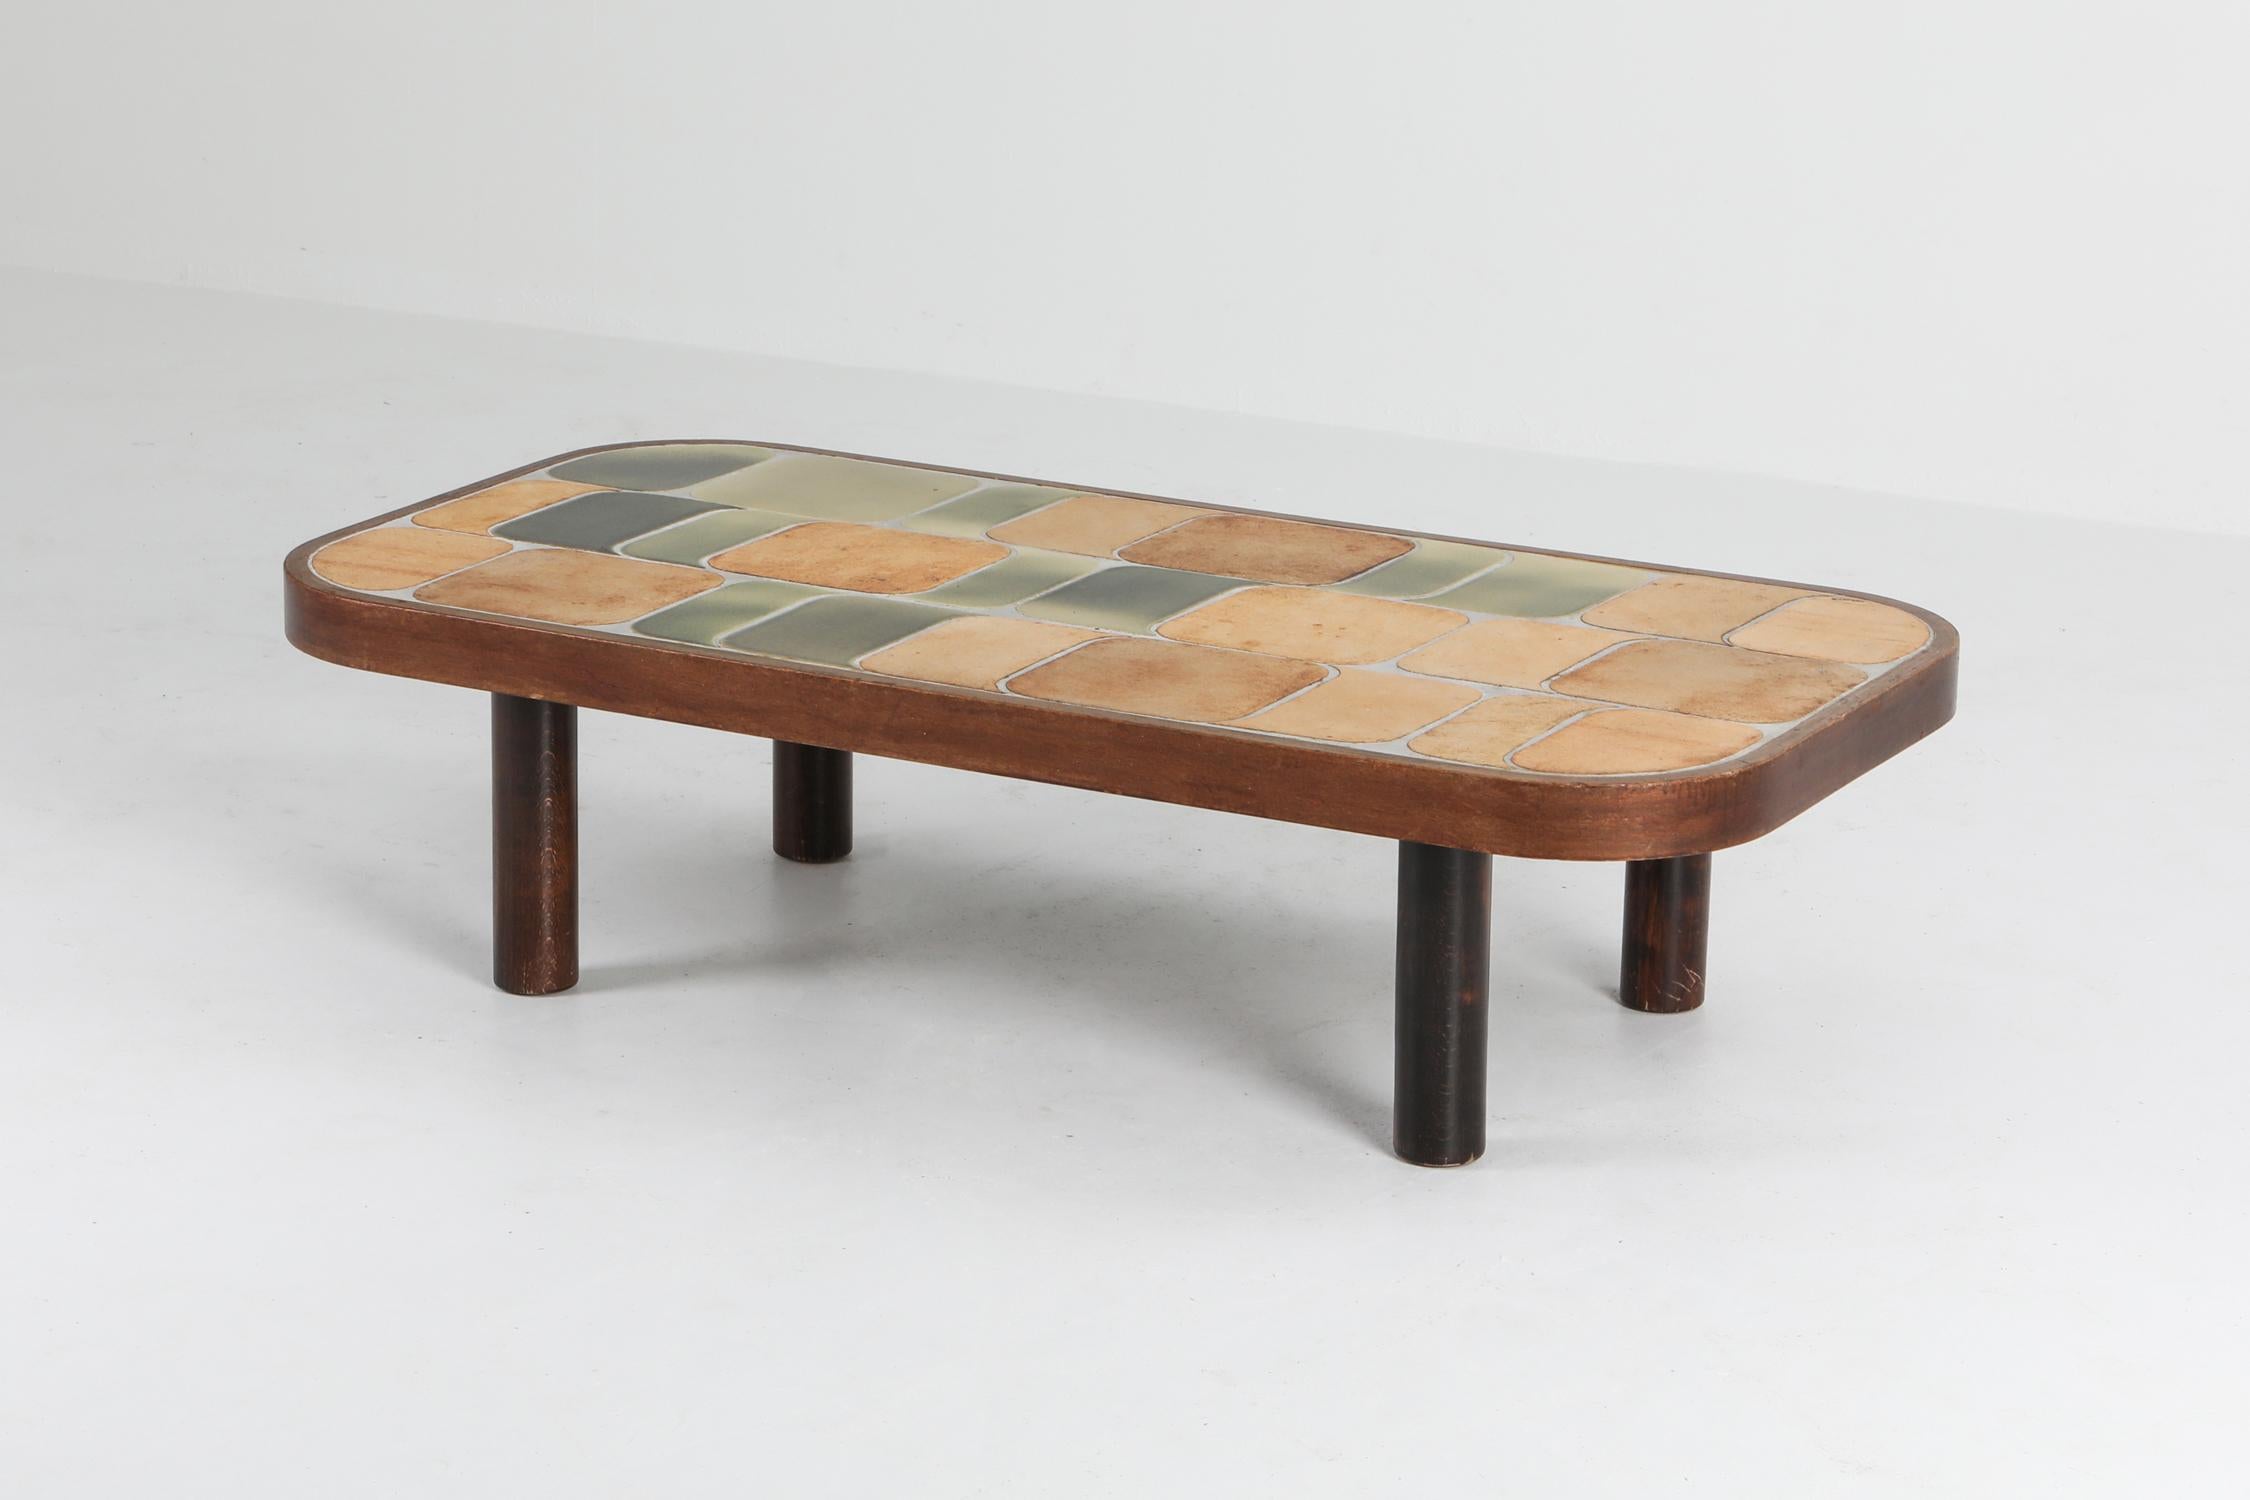 Mid-Century Modern ceramic tile top coffee table by Roger Capron, France 1960s features his unique 